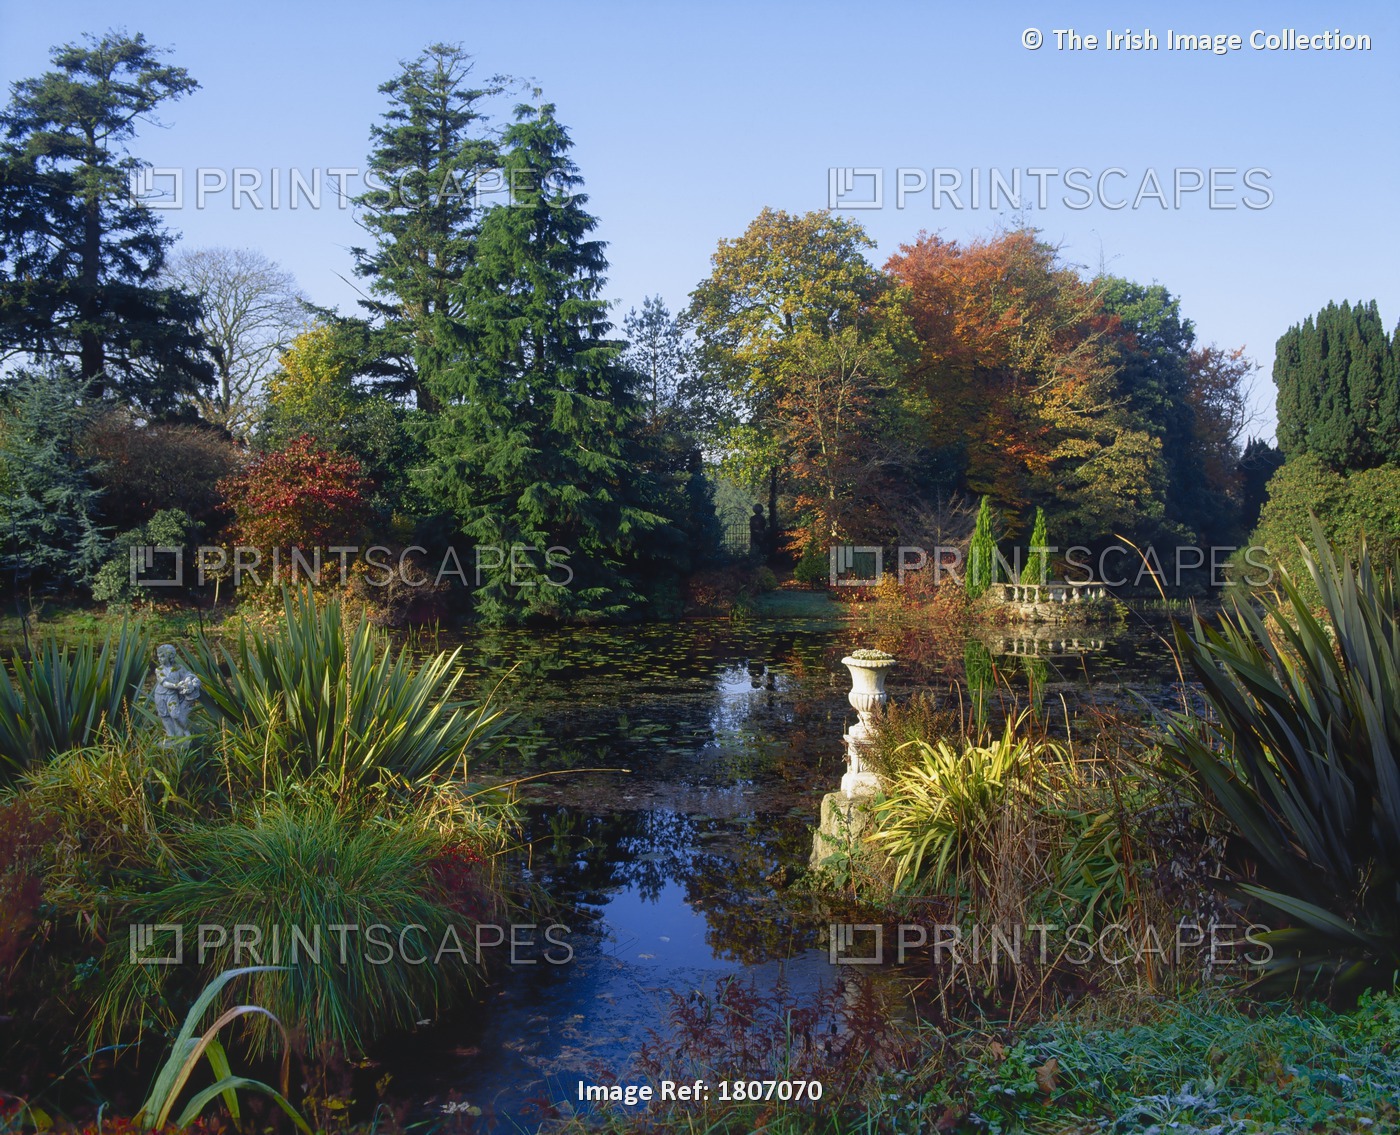 Altamont Garden, Co Carlow, Ireland; Sculptures By The Lake During Autumn